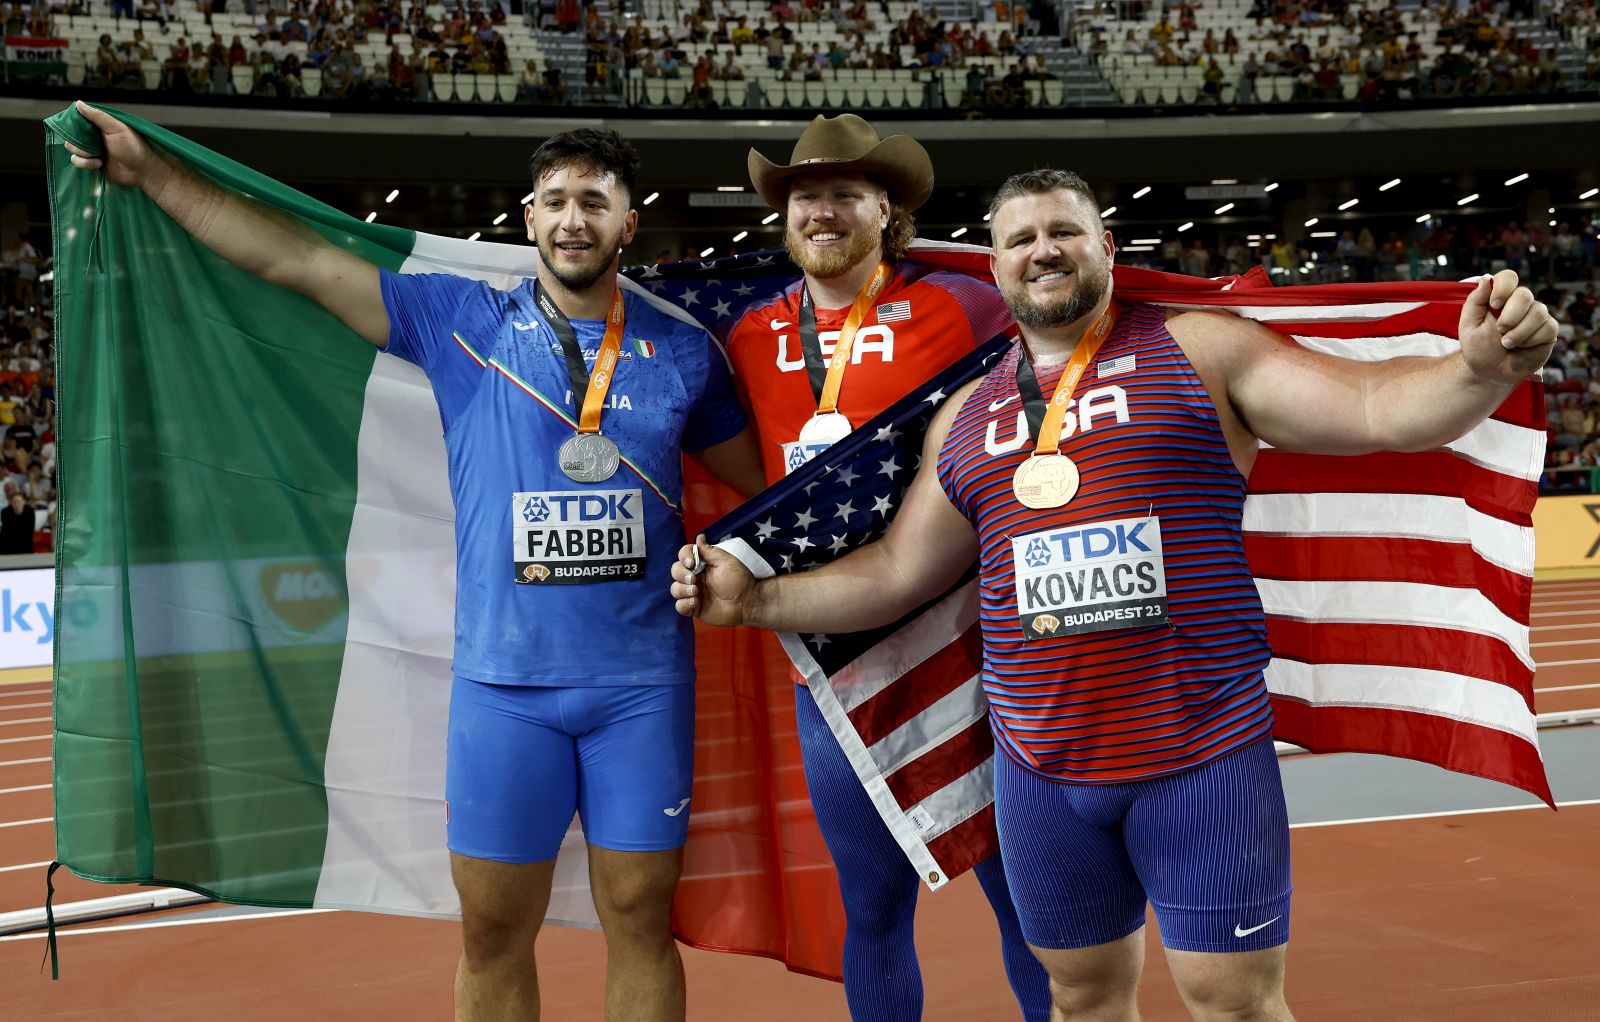 epa10808259 (from L) Silver medalist Leonardo Fabbri of Italy, gold medalist Ryan Crouser of the USA and bronze medalist Joe Kovacs of the USA celebrate after the Men's Shot Put final at the World Athletics Championships Budapest, Hungary, 19 August 2023.  EPA/ROBERT GHEMENT